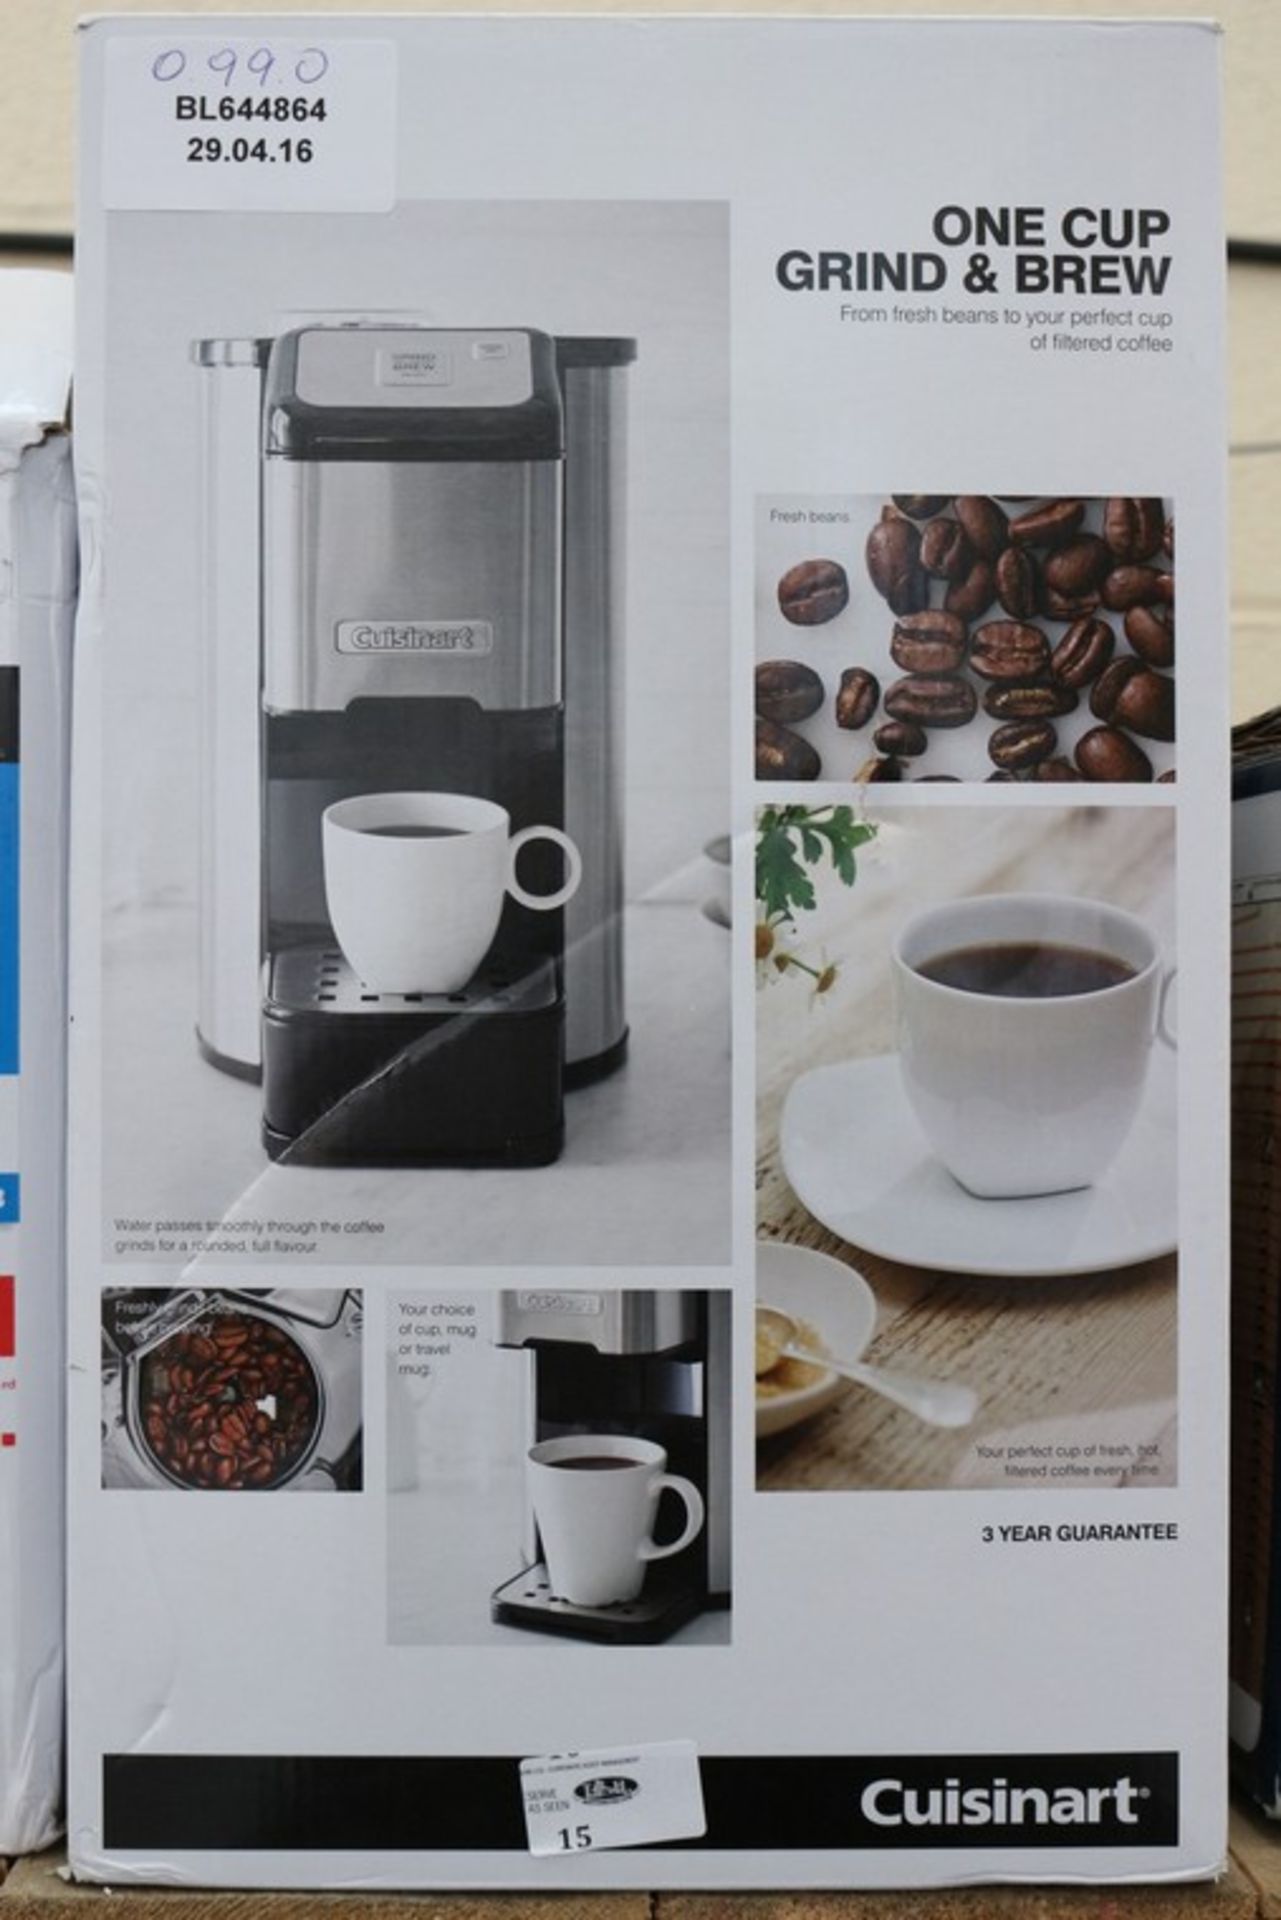 1 x BOXED CUISINE ART 1 CUP GRIND AND BREW AUTOMATIC CAPPUCCINO MAKER RRP £100 (29.4.16) *PLEASE